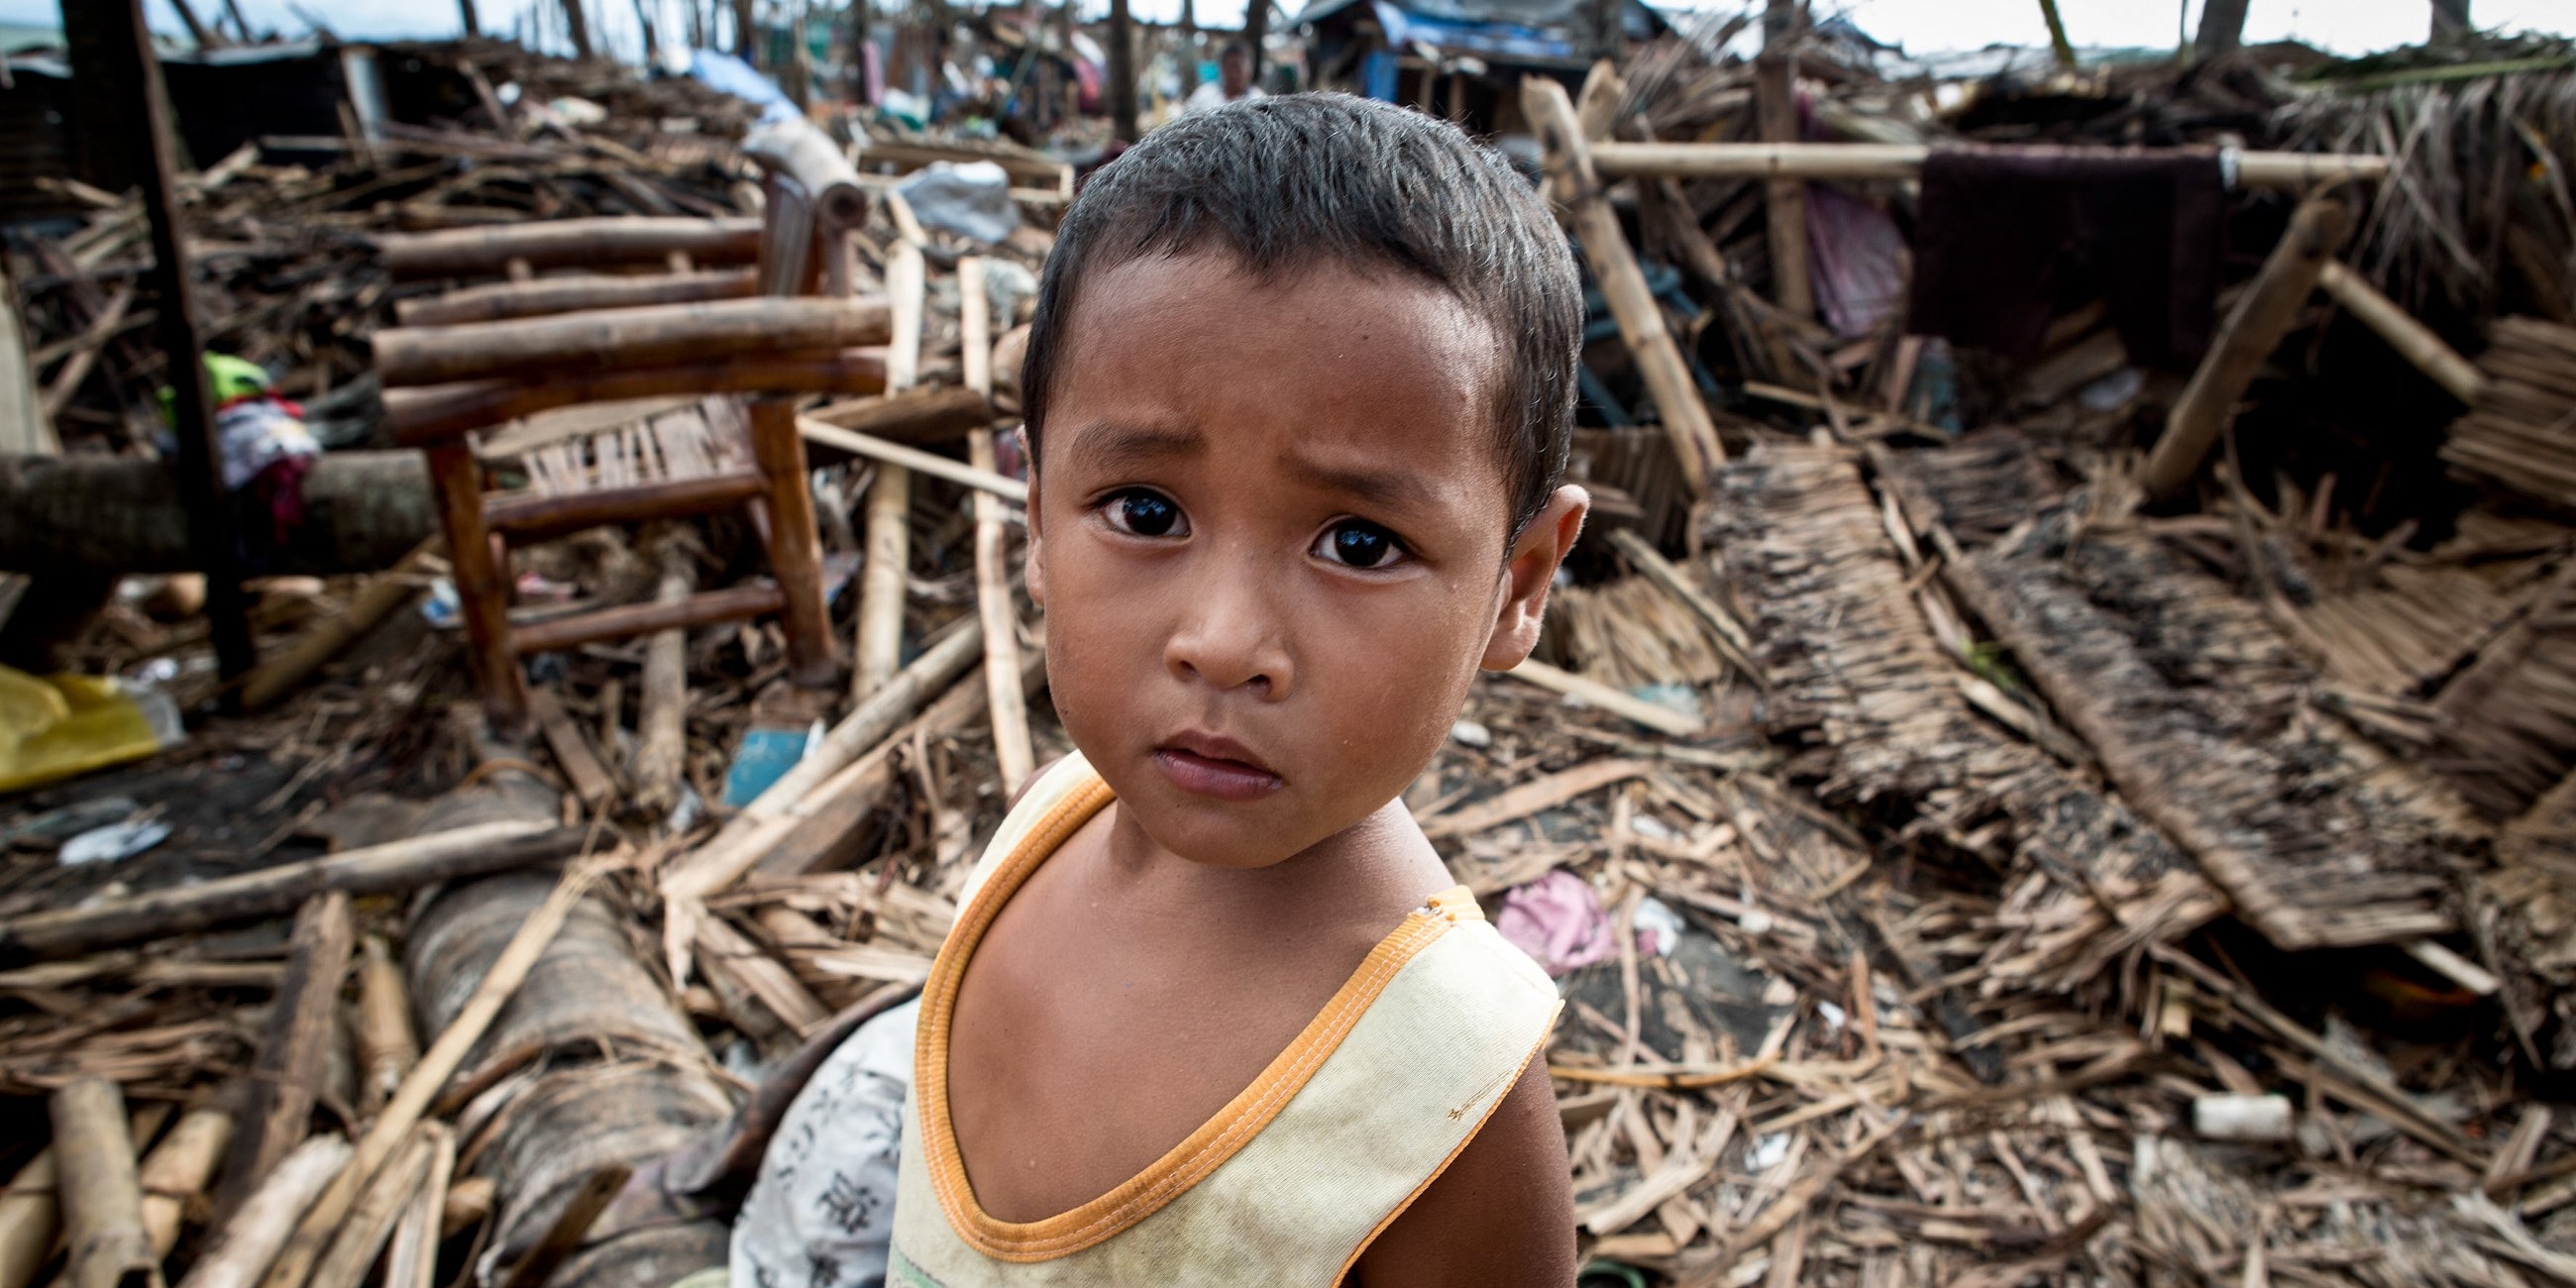 Kirby, four, stands amongst the debris where his house once stood before it was destroyed by typhoon Haiyan, Philippines. Photo Credit: Jonathan Hyams/Save the Children 2013